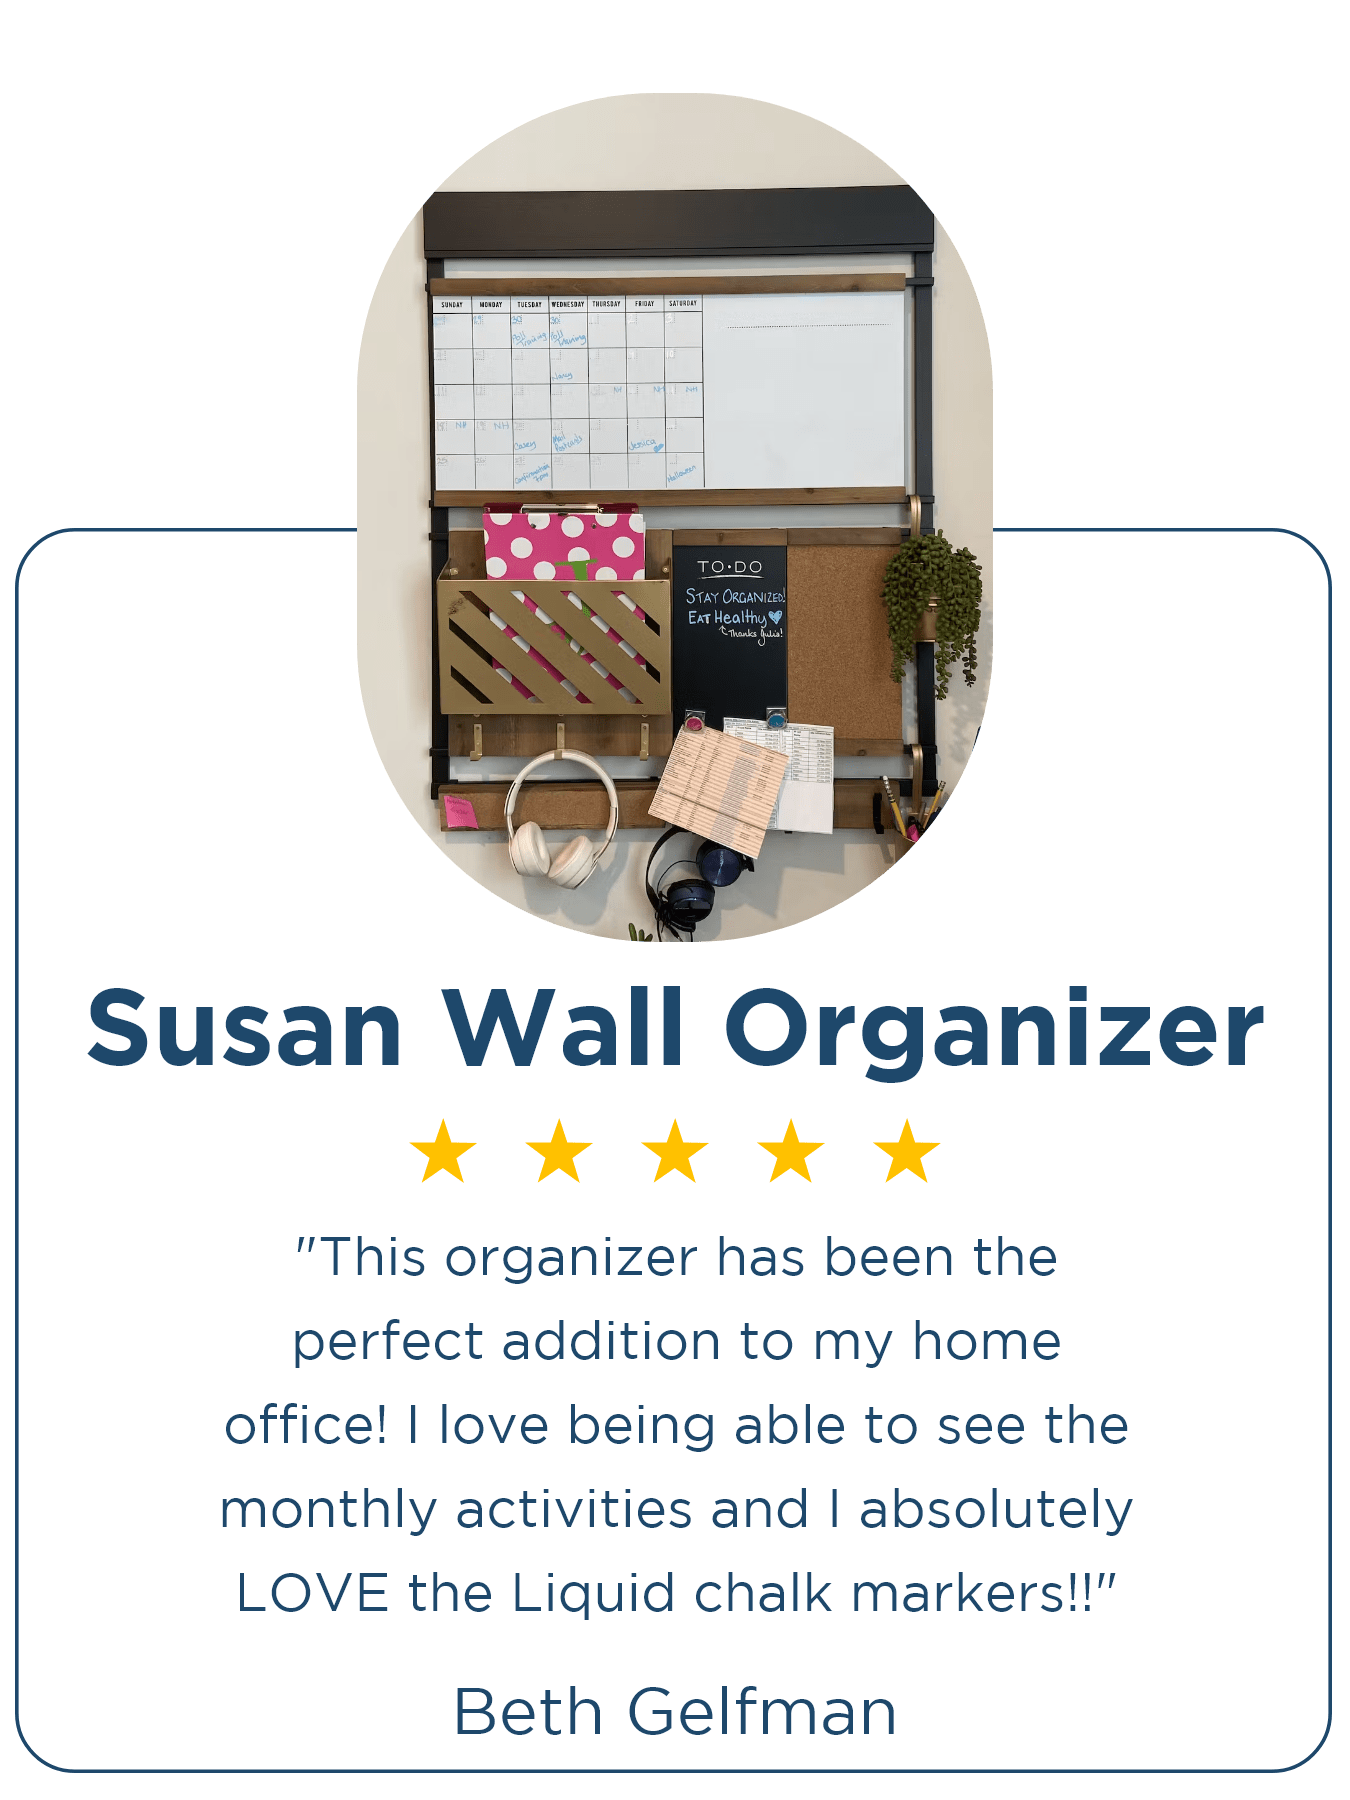 ⭐⭐⭐⭐⭐ Beth Gelfman | Susan Wall Organizer "This organizer has been the perfect addition to my home office! I love being able to see the monthly activities and I absolutely LOVE the Liquid chalk markers!!"